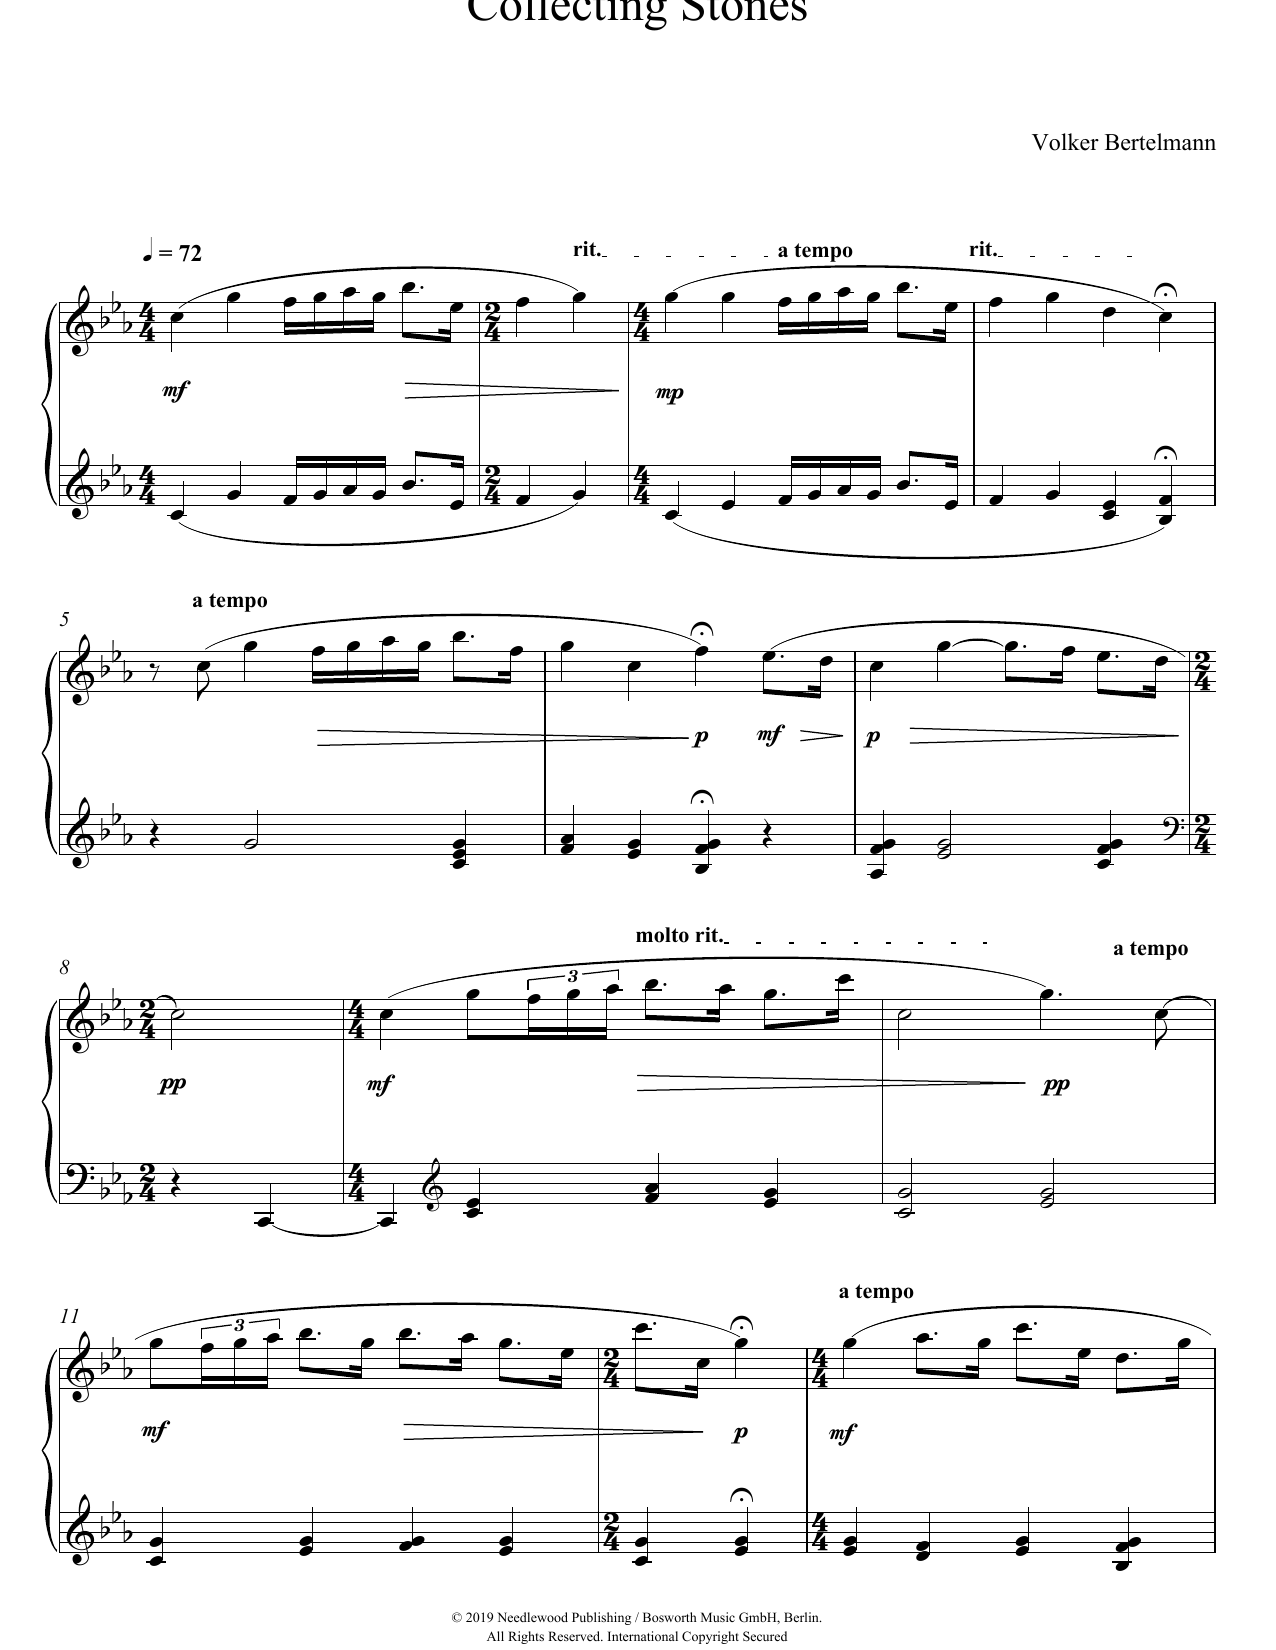 Download Hauschka Collecting Stones Sheet Music